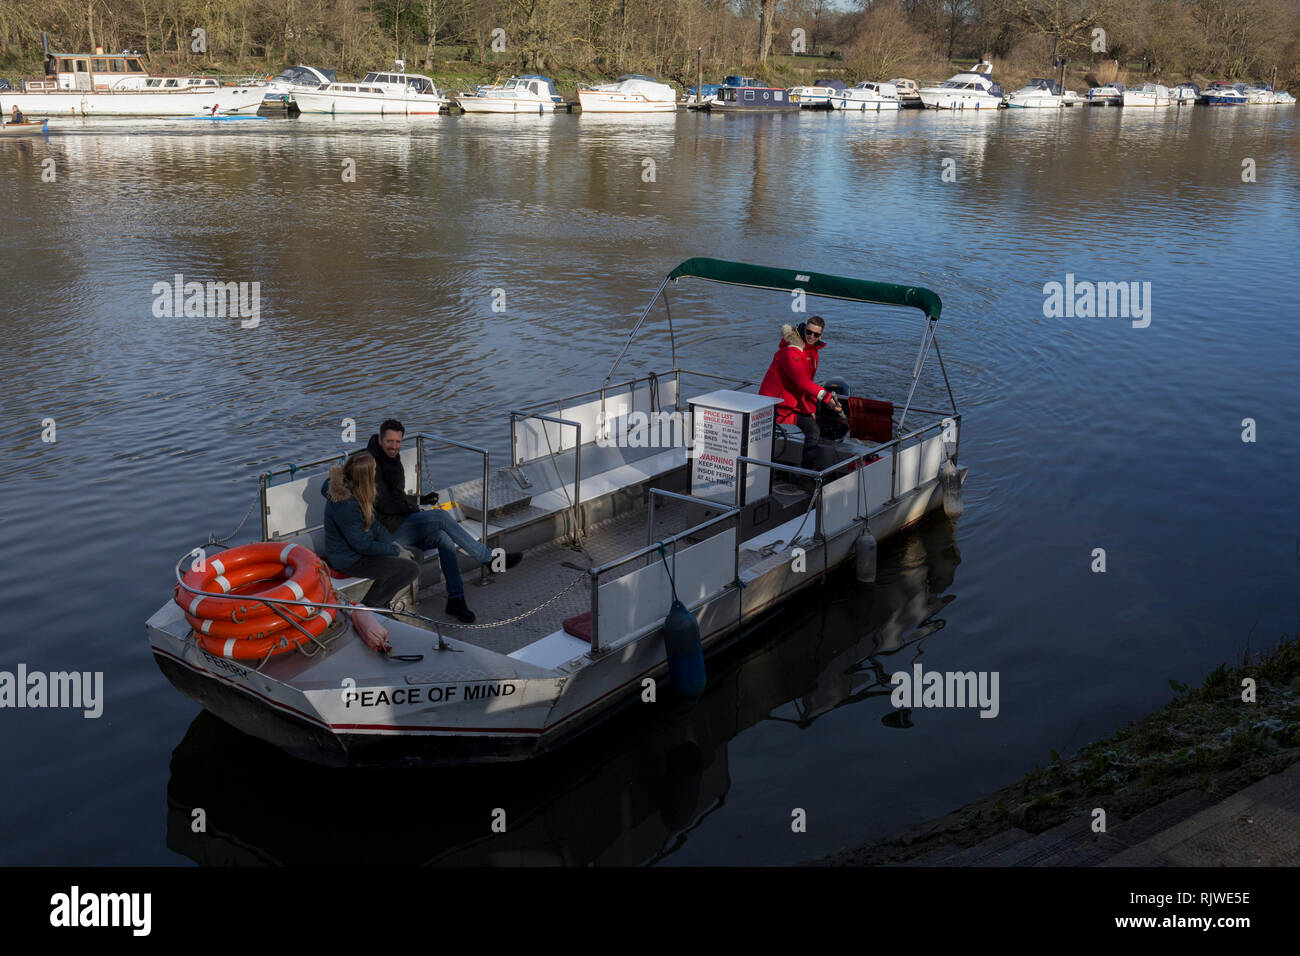 Two passengers on Hammerton's Ferry, cross the river Thames between Marble Hill House on the north bank, and Ham on the southern bank, on 3rd February 2019, in London, England. Hammertons Ferry was originally opened in 1908 by Walter Hammerton and its current owners are Mr & Mrs Francis Spencer in July, 2003. The whole family are currently involved in all aspects of the business, however the daily running of the Ferry is by father & son, Francis & Andrew Spencer. Hammerton's is a pedestrian and cycle ferry service across the River Thames in the London Borough of Richmond upon Thames, London Stock Photo